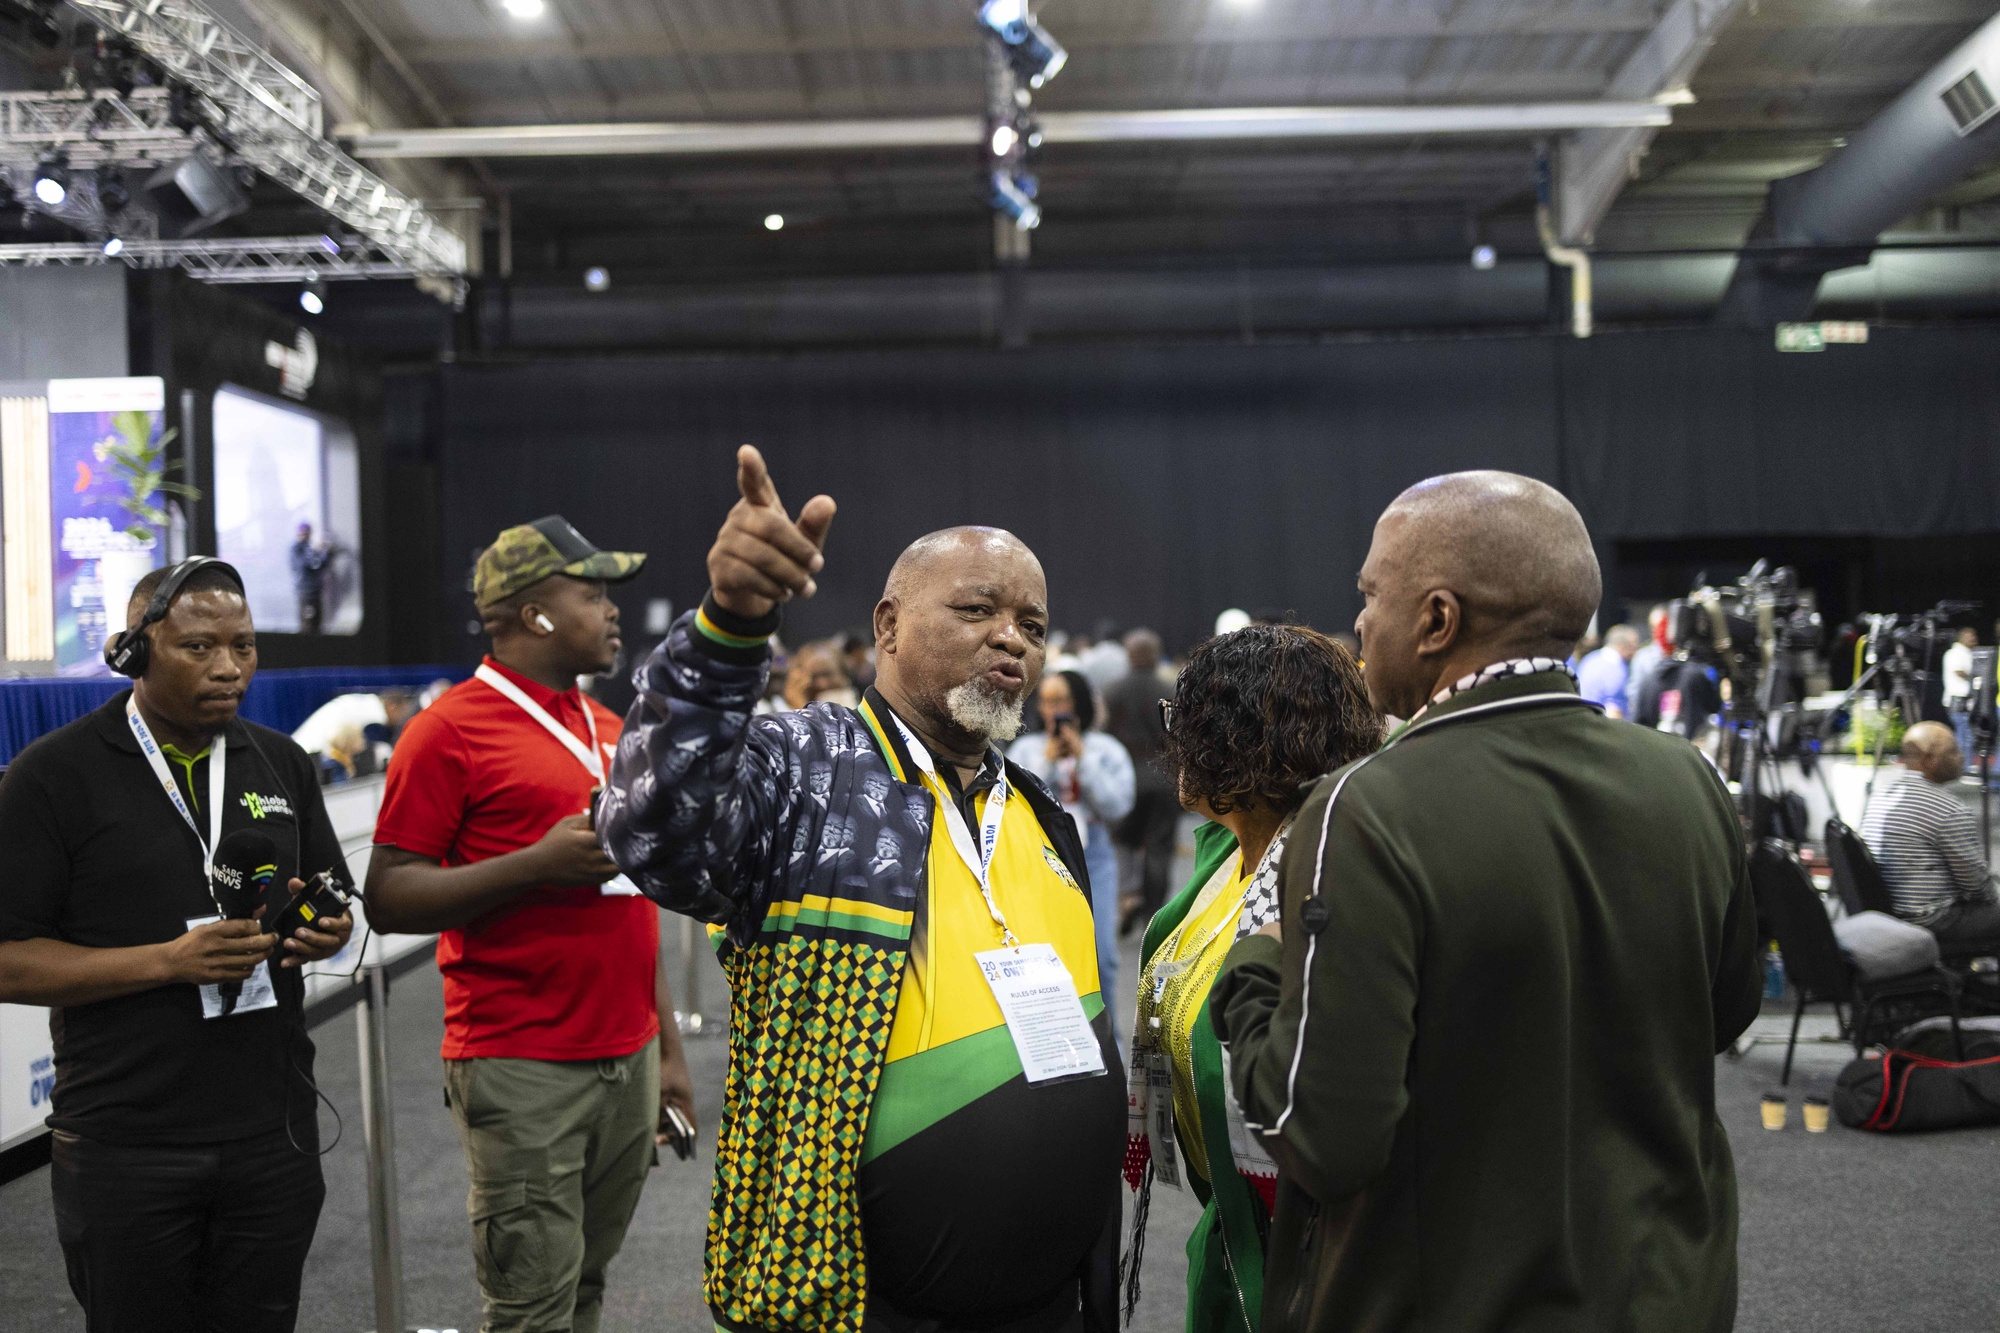 epa11381946 ANC (African National Congress) member of the national assembly, Gwede Mantashe (C) in the IEC (Independent Electoral Commission) National Results Operations Centre as voting counting continues after yesterdays the 2024 South African general election in Johannesburg, South Africa, 31 May 2024. Over 27 million citizens are registered to vote in the national and provincial elections to elect a new National Assembly and state legislatures according to the electoral commission of South Africa. South Africans do not directly vote for the president. They vote for parties that will appoint 400 representatives to the National Assembly who will then choose the president for the next five years with a simple majority of 201 votes or more. Some of the main concerns of South Africans are unemployment, unreliable electricity supply, corruption, economic issues including inflation and poverty according to an Afrobarometer pre-election survey. Those issues could mean the end of the political dominance of the African National Congress (ANC), three decades after Nelson Mandela led the party to power.  EPA/KIM LUDBROOK